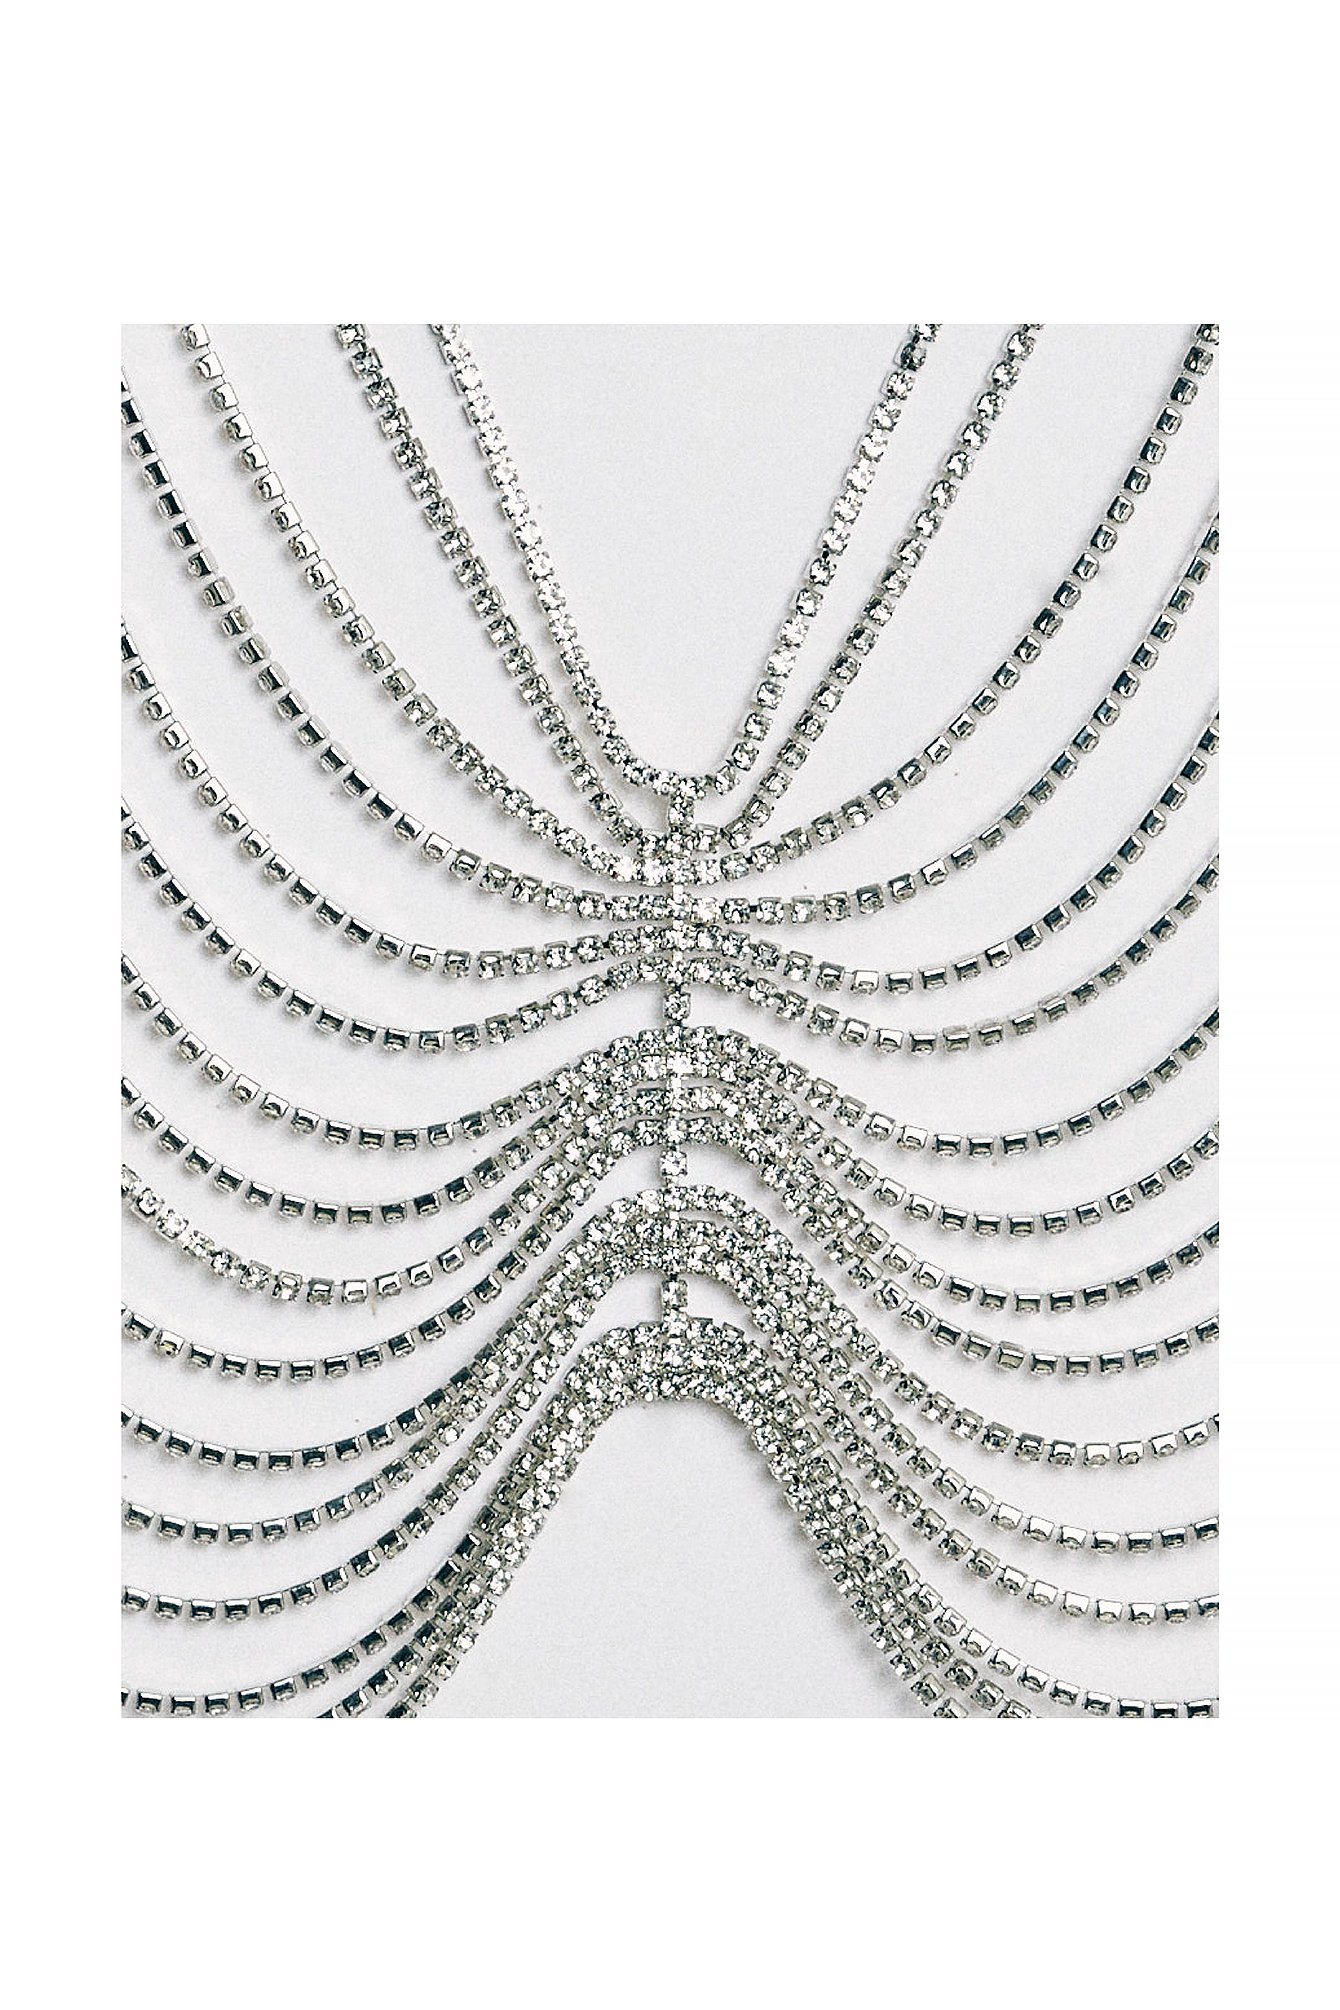 NA-KD Accessories Wide Strass Belly Chain - Silver